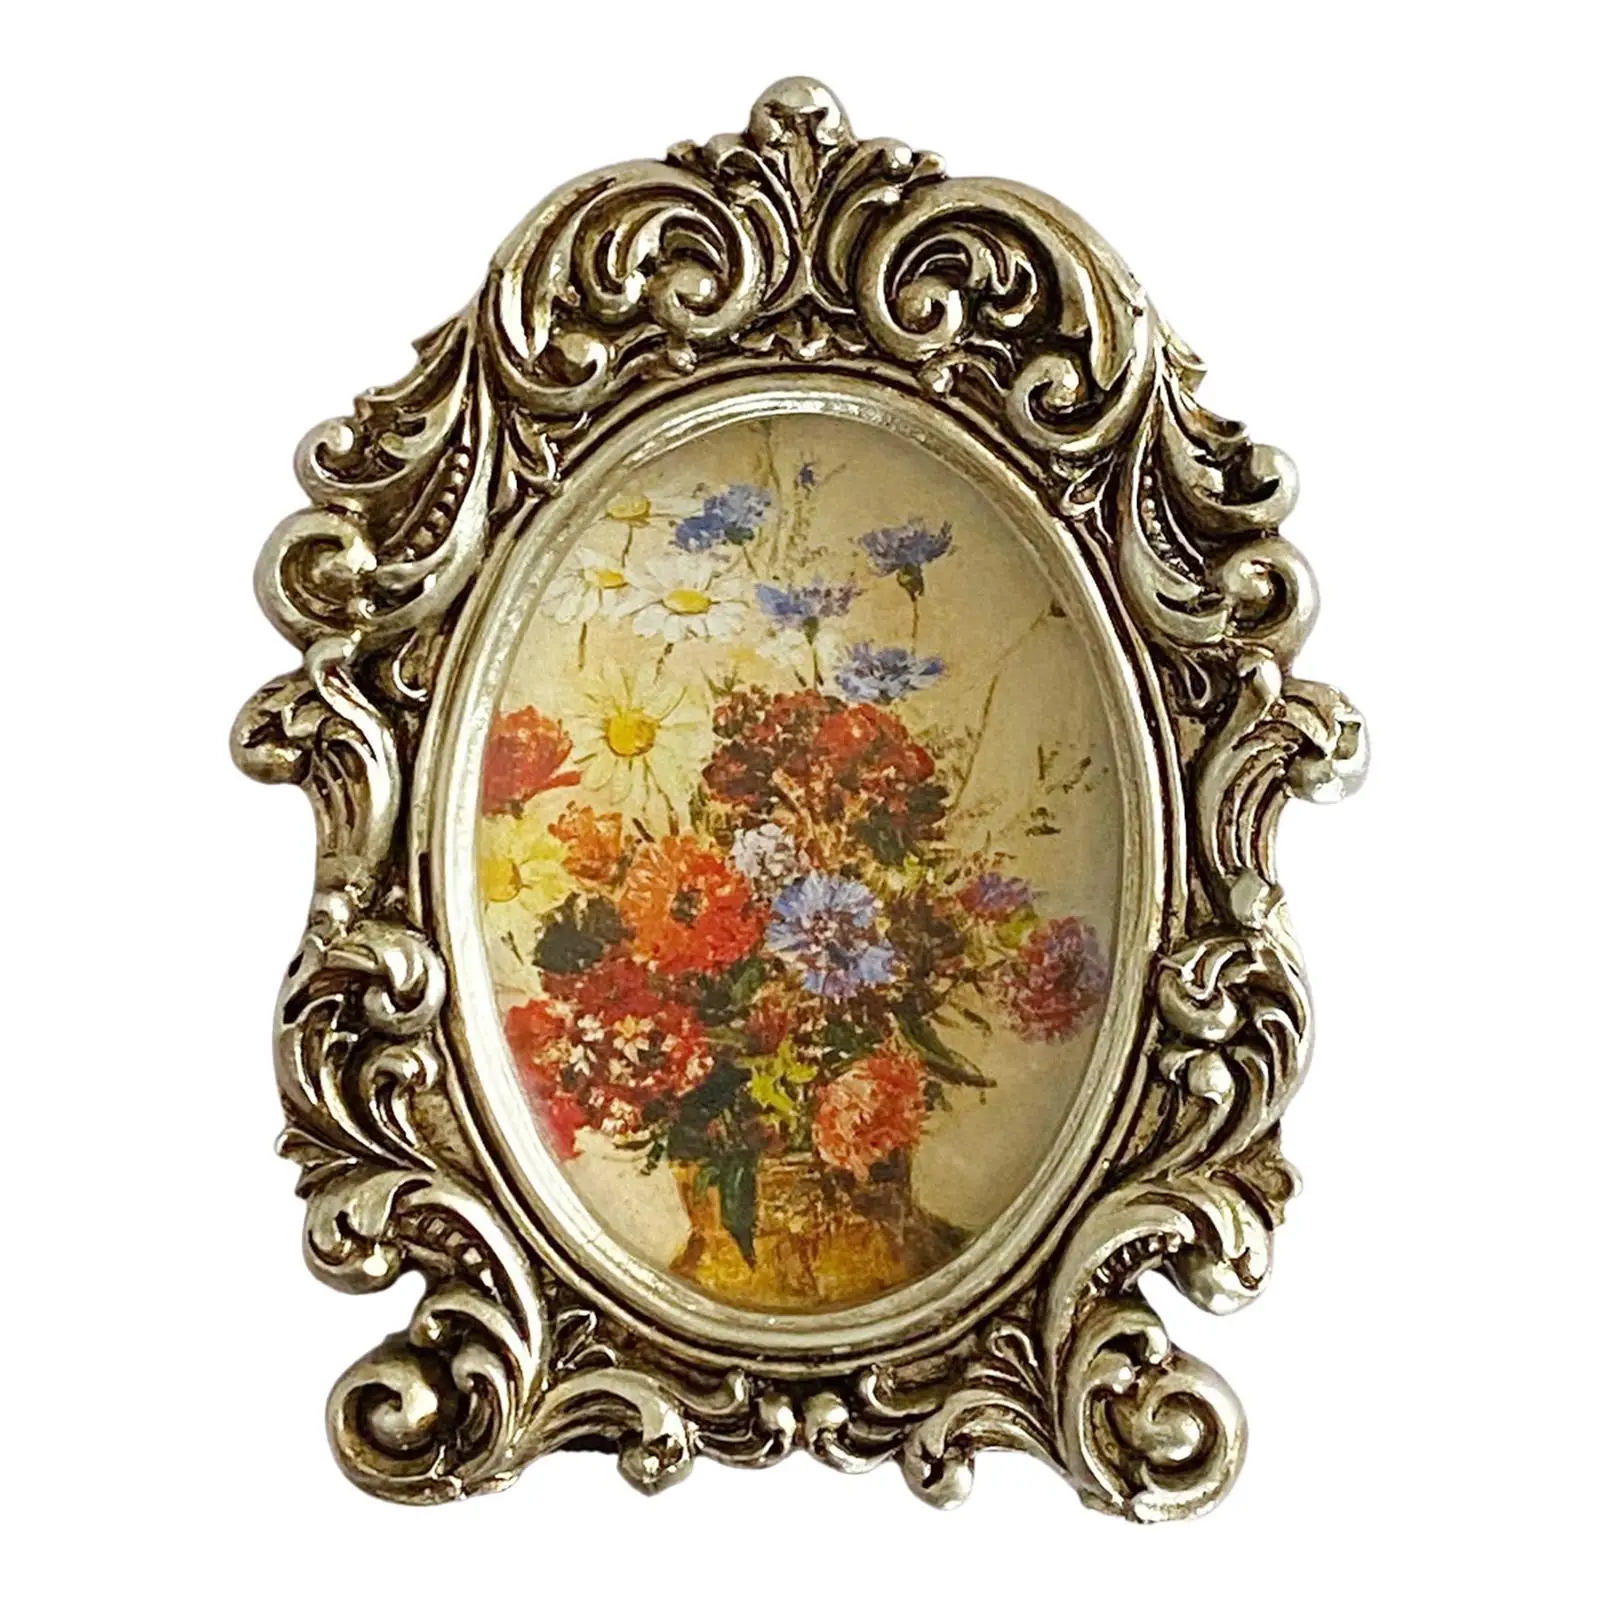 Photo Frame Photo Holder Baroque Tabletop Wall Hanging Desktop Picture Frame for Bedroom Table Centerpiece Home Decoration